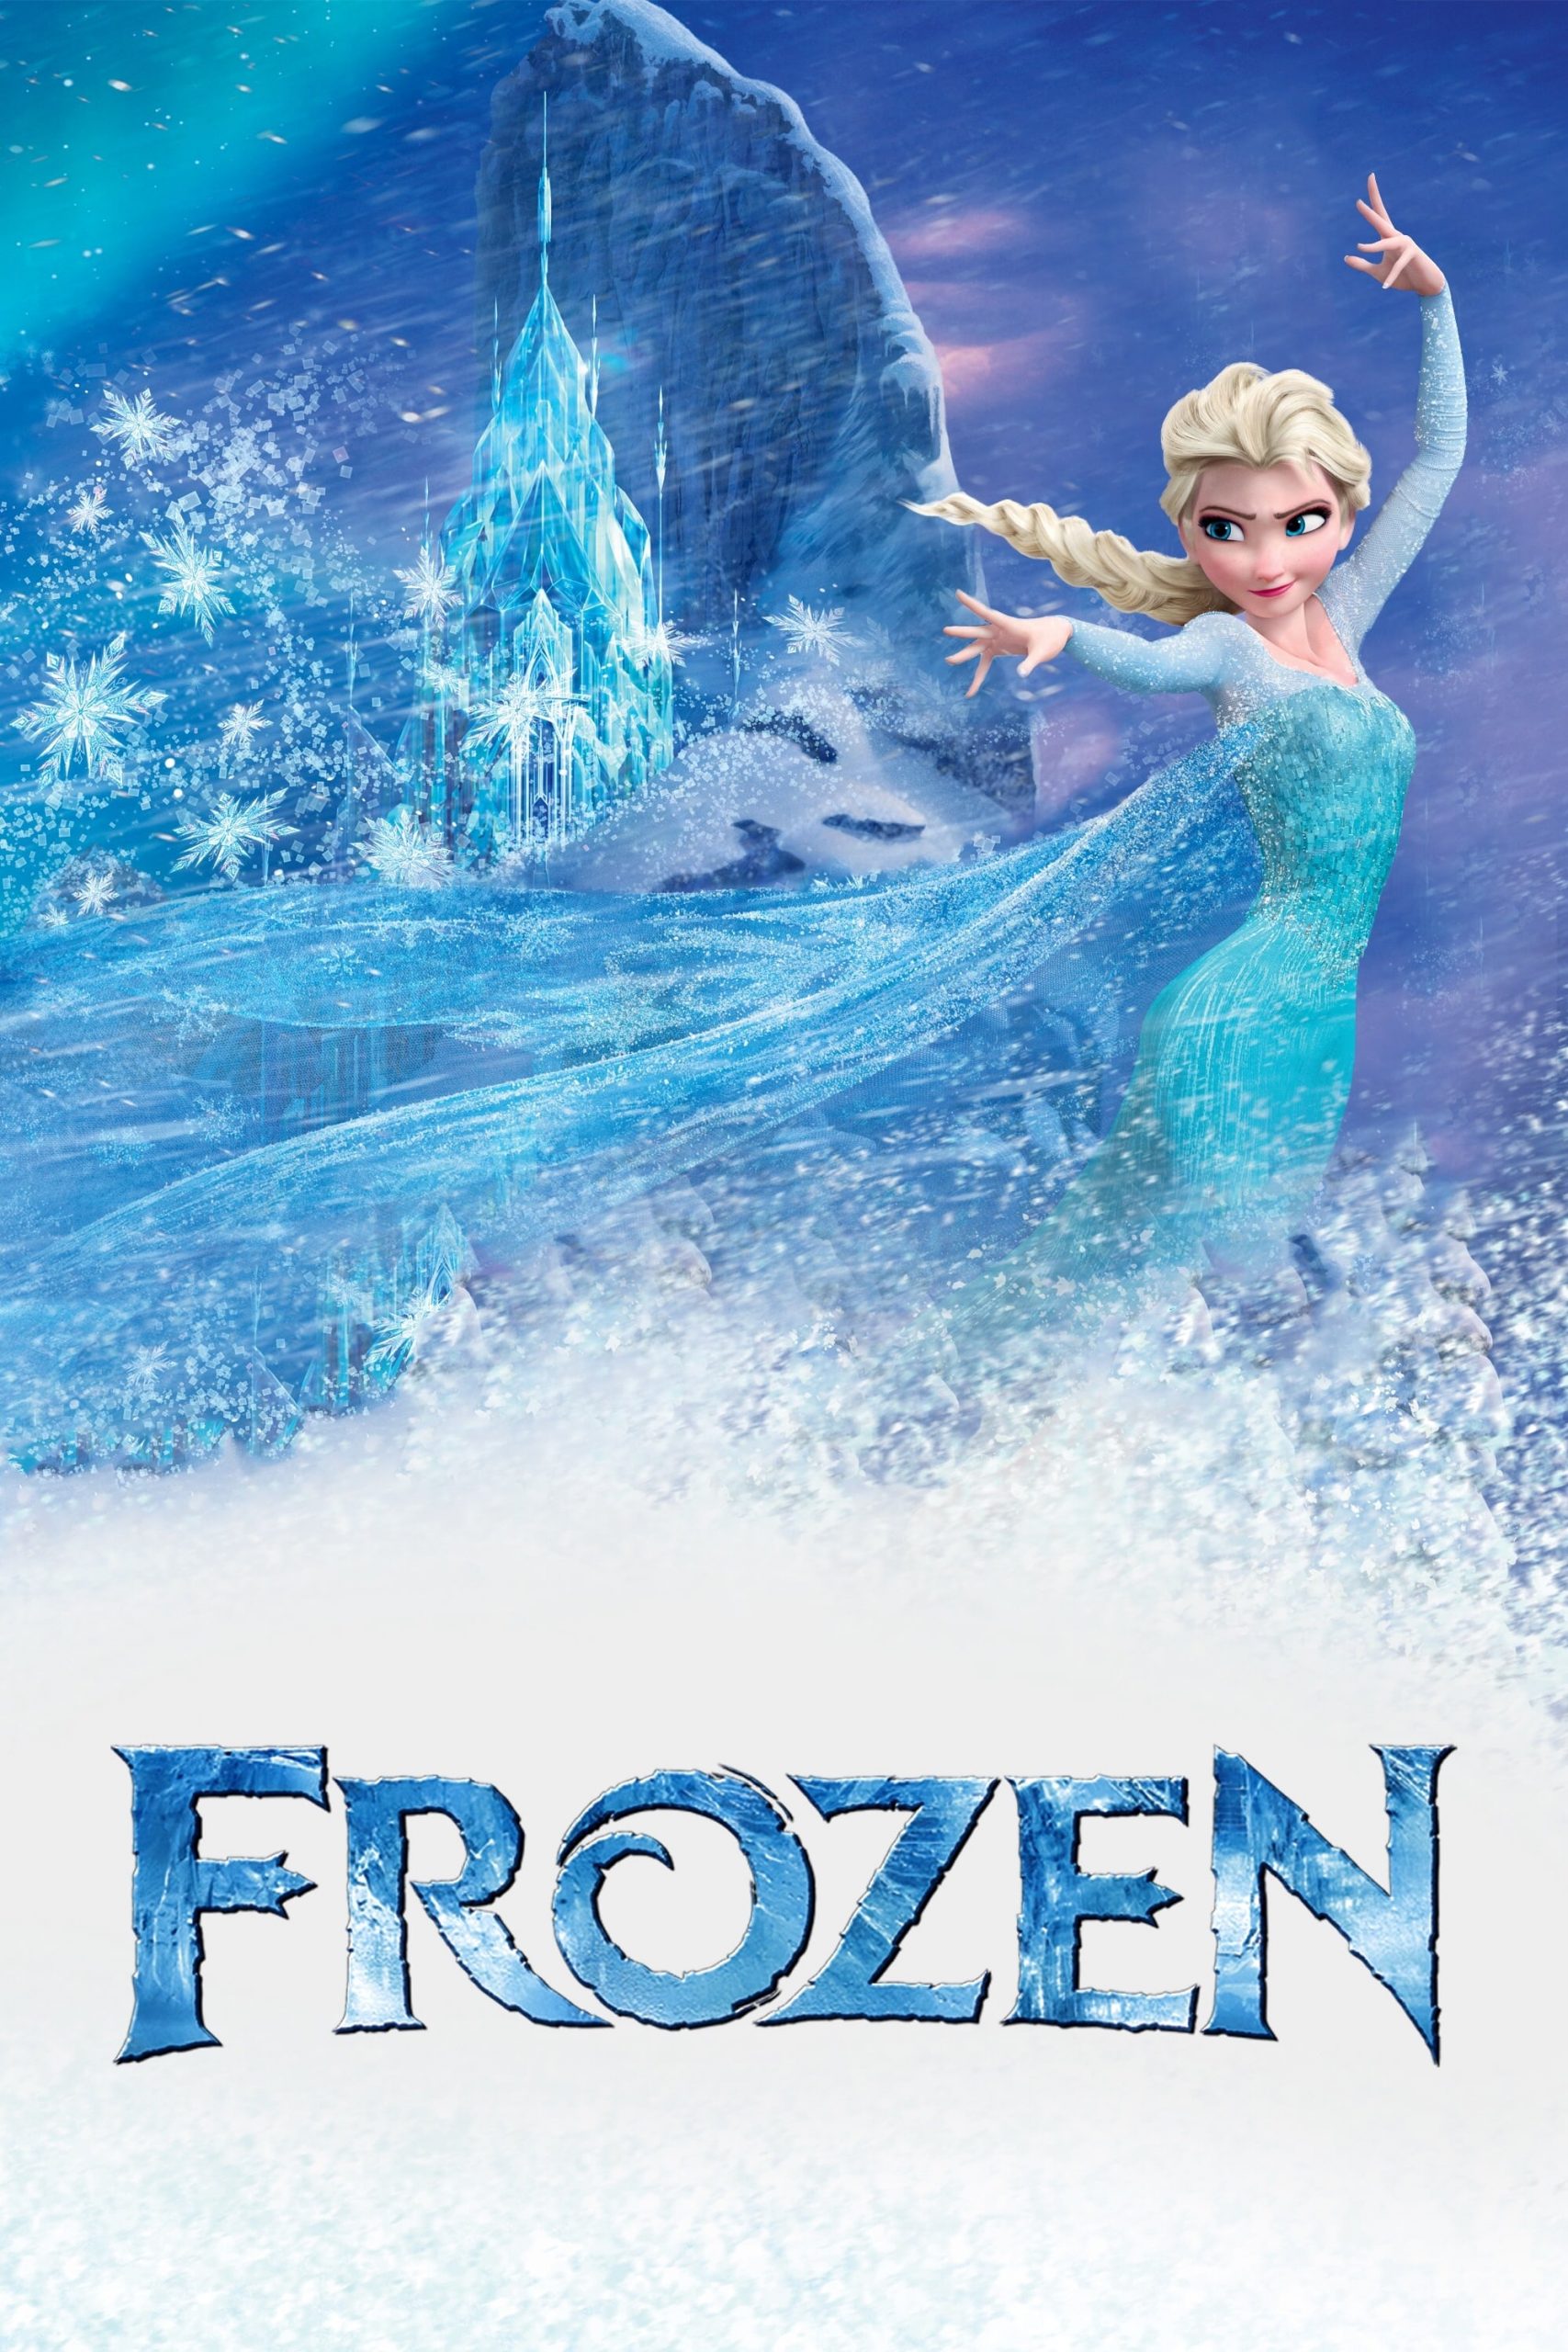 The poster for the Disney movie "Frozen," with the central character of the film against a blue, wintry background.